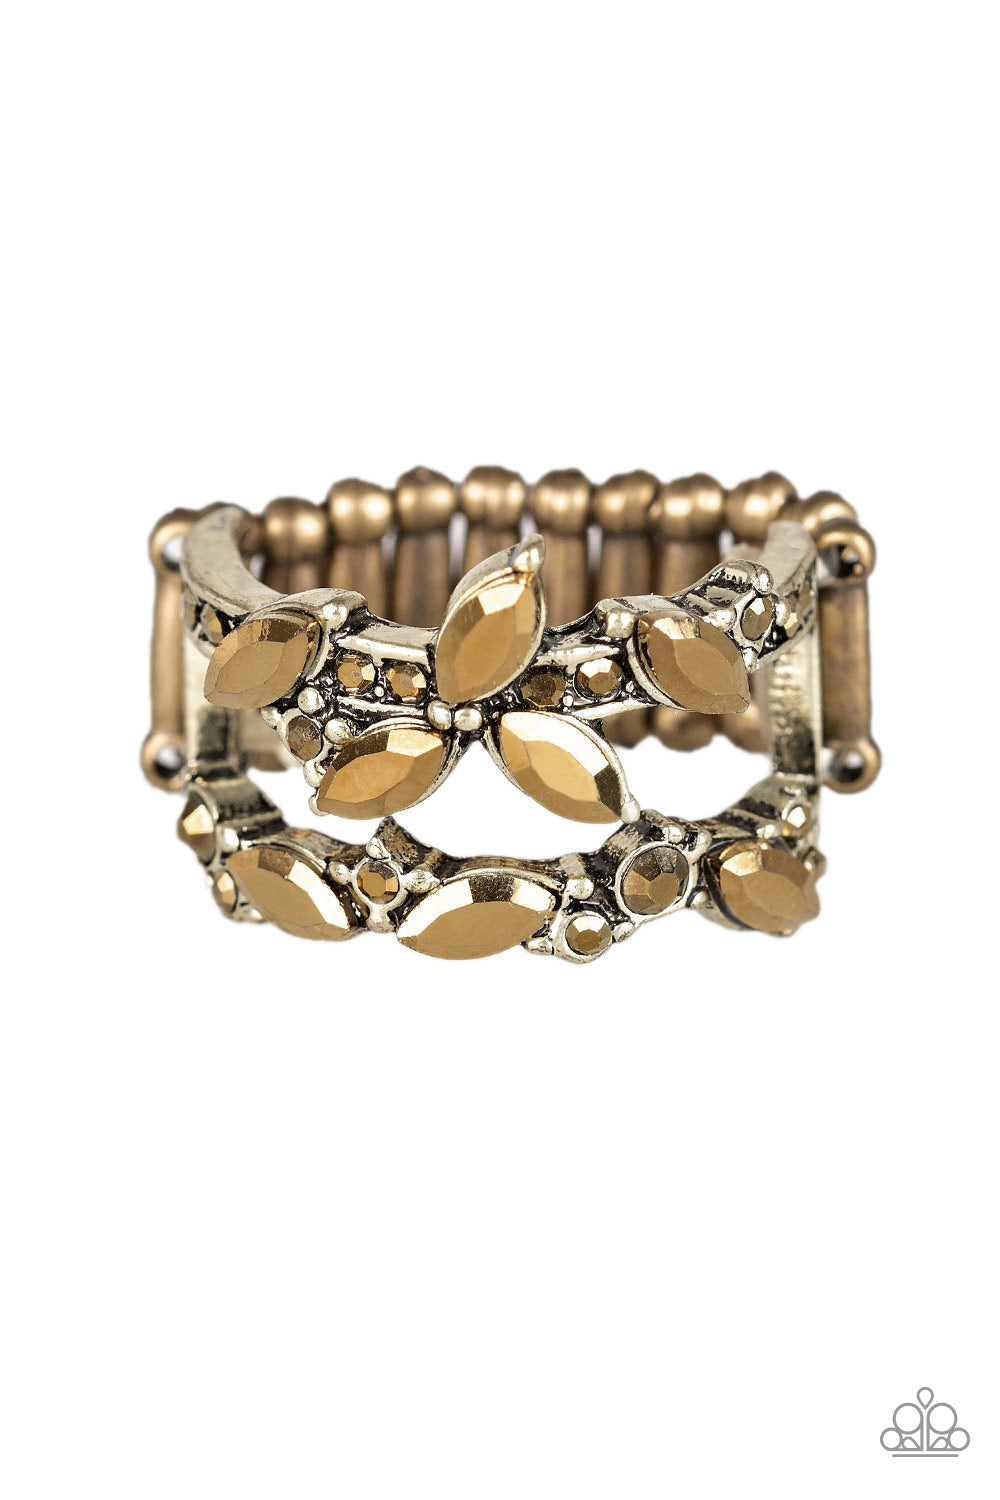 Cosmo Collection - Brass Ring - Susan's Jewelry Shop